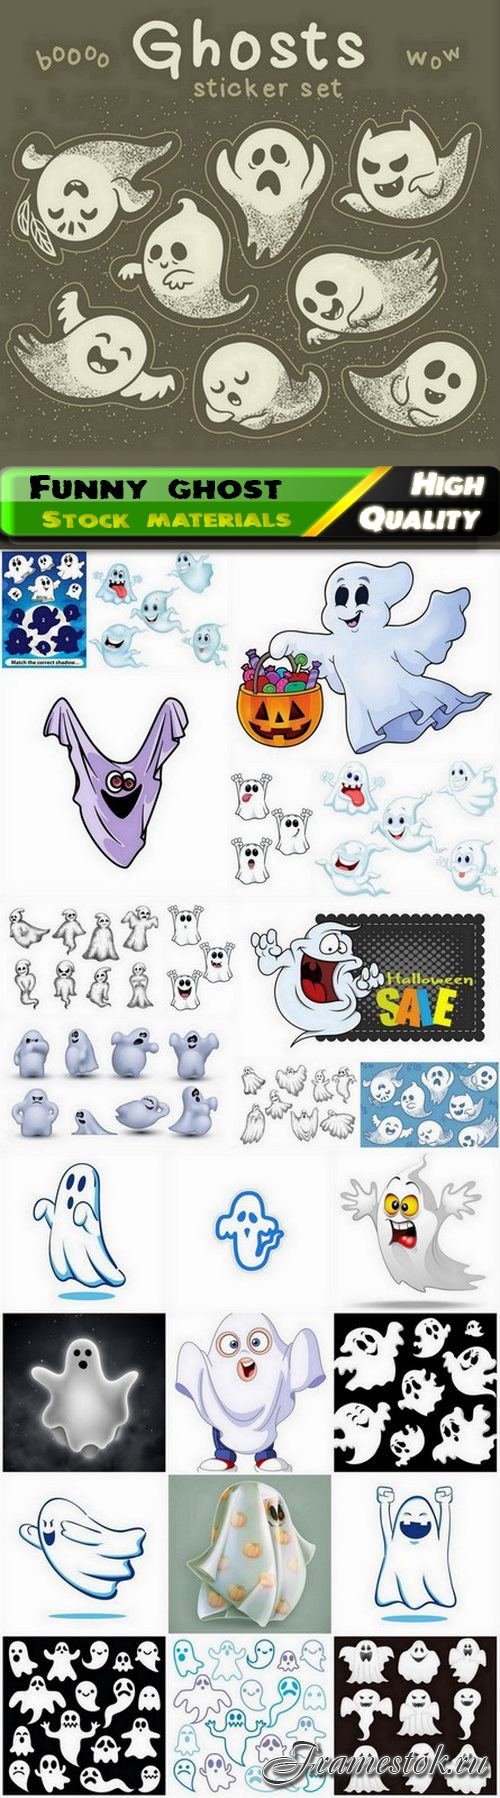 Funny ghost and scary soul for halloween holiday - 25 Eps